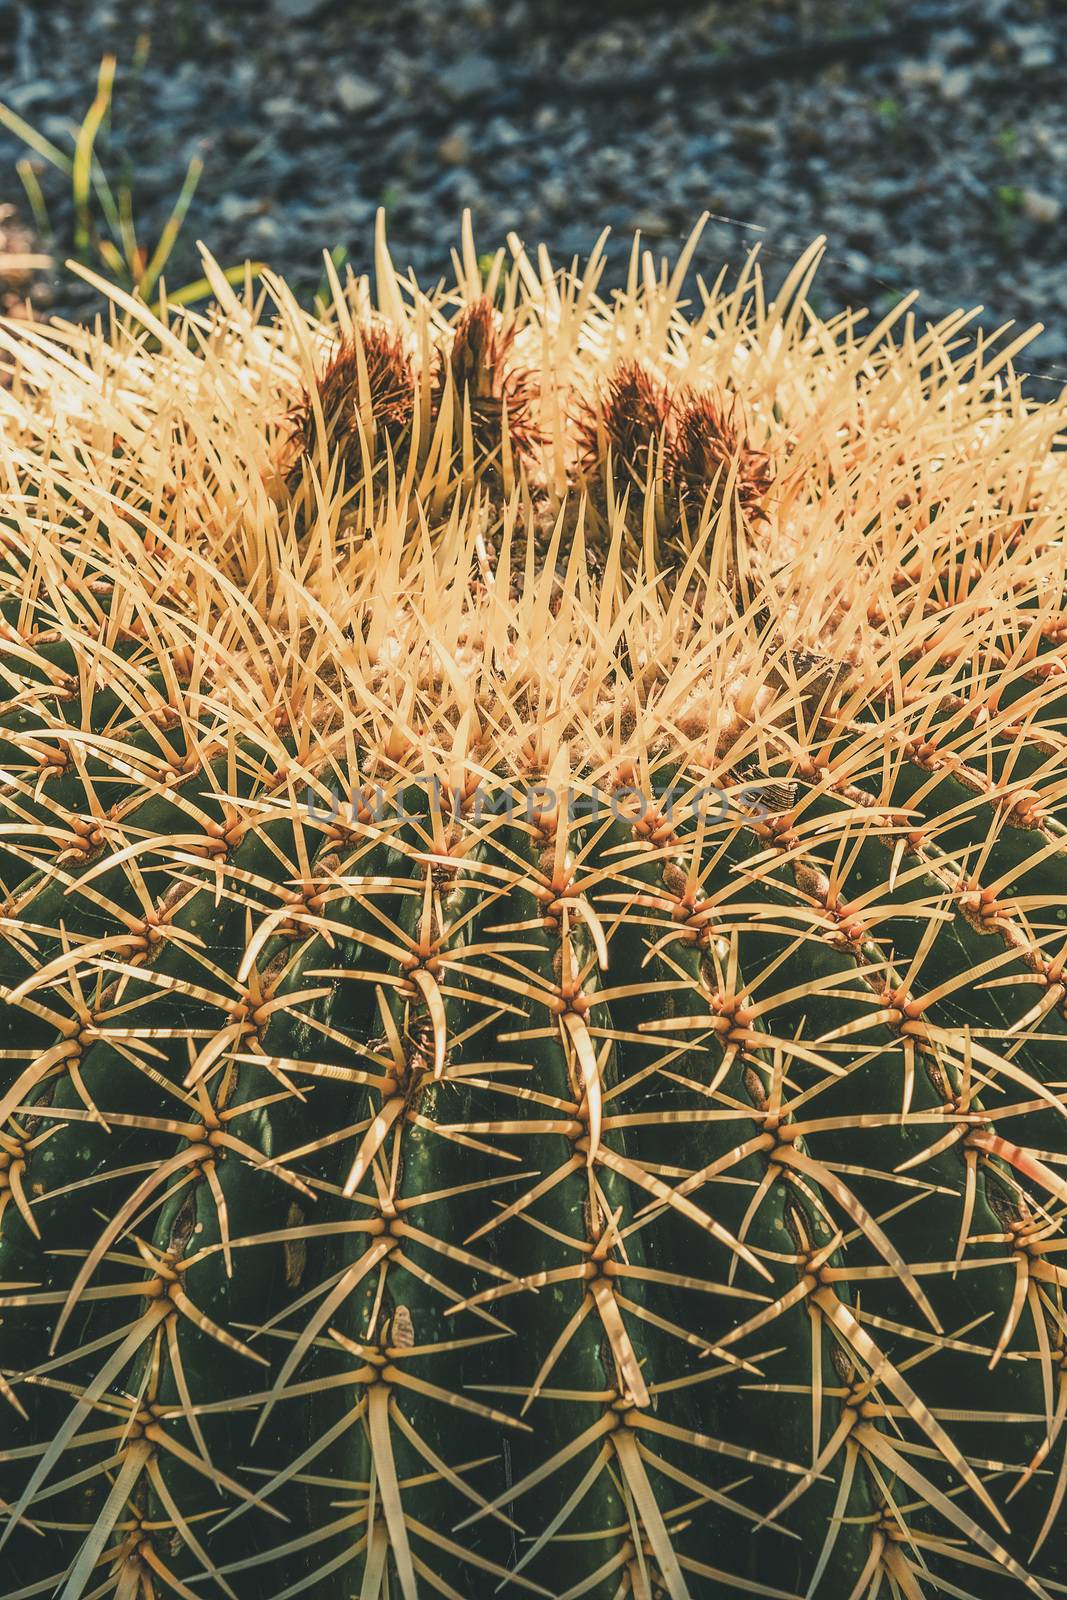 Vertical closeup of a Golden Barrel cactus with spike thorns in a desert garden, Echinocactus Grusonii, copy space for text